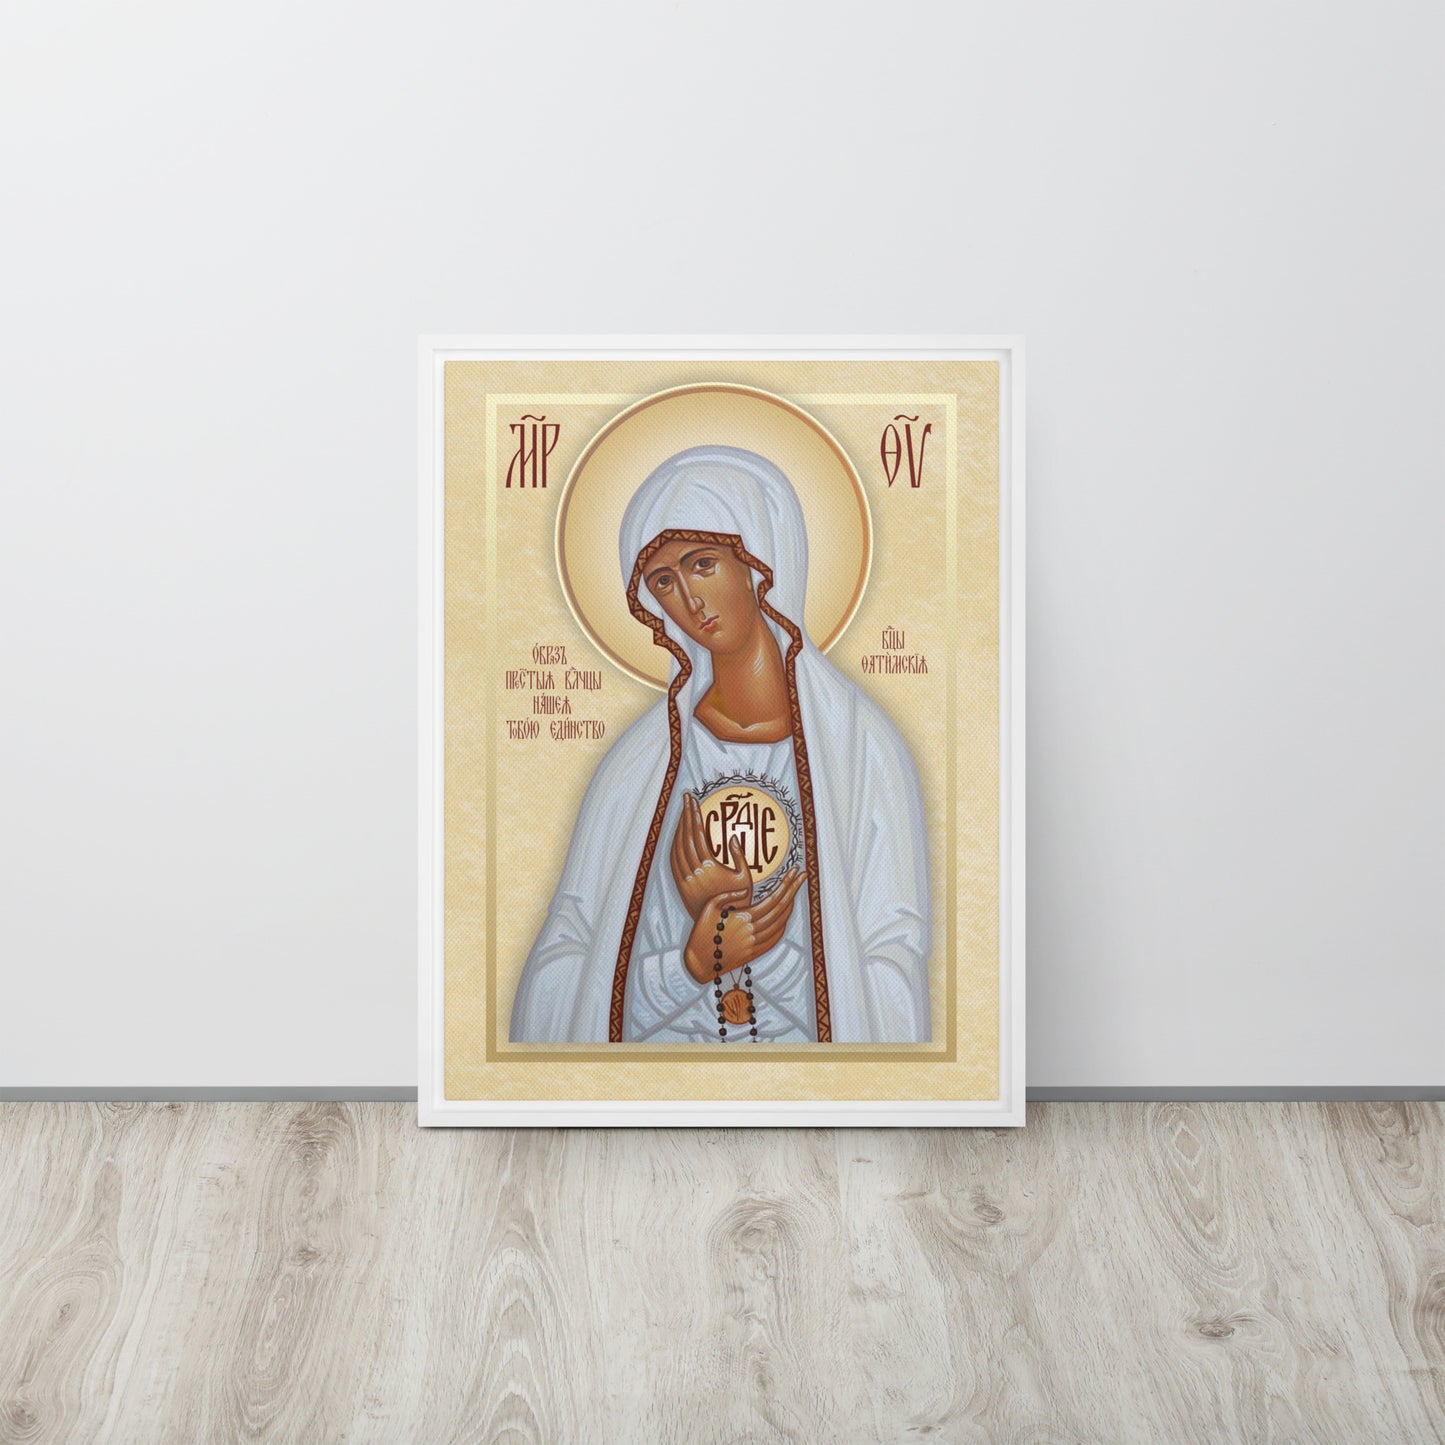 Our Lady of Fatima Framed canvas